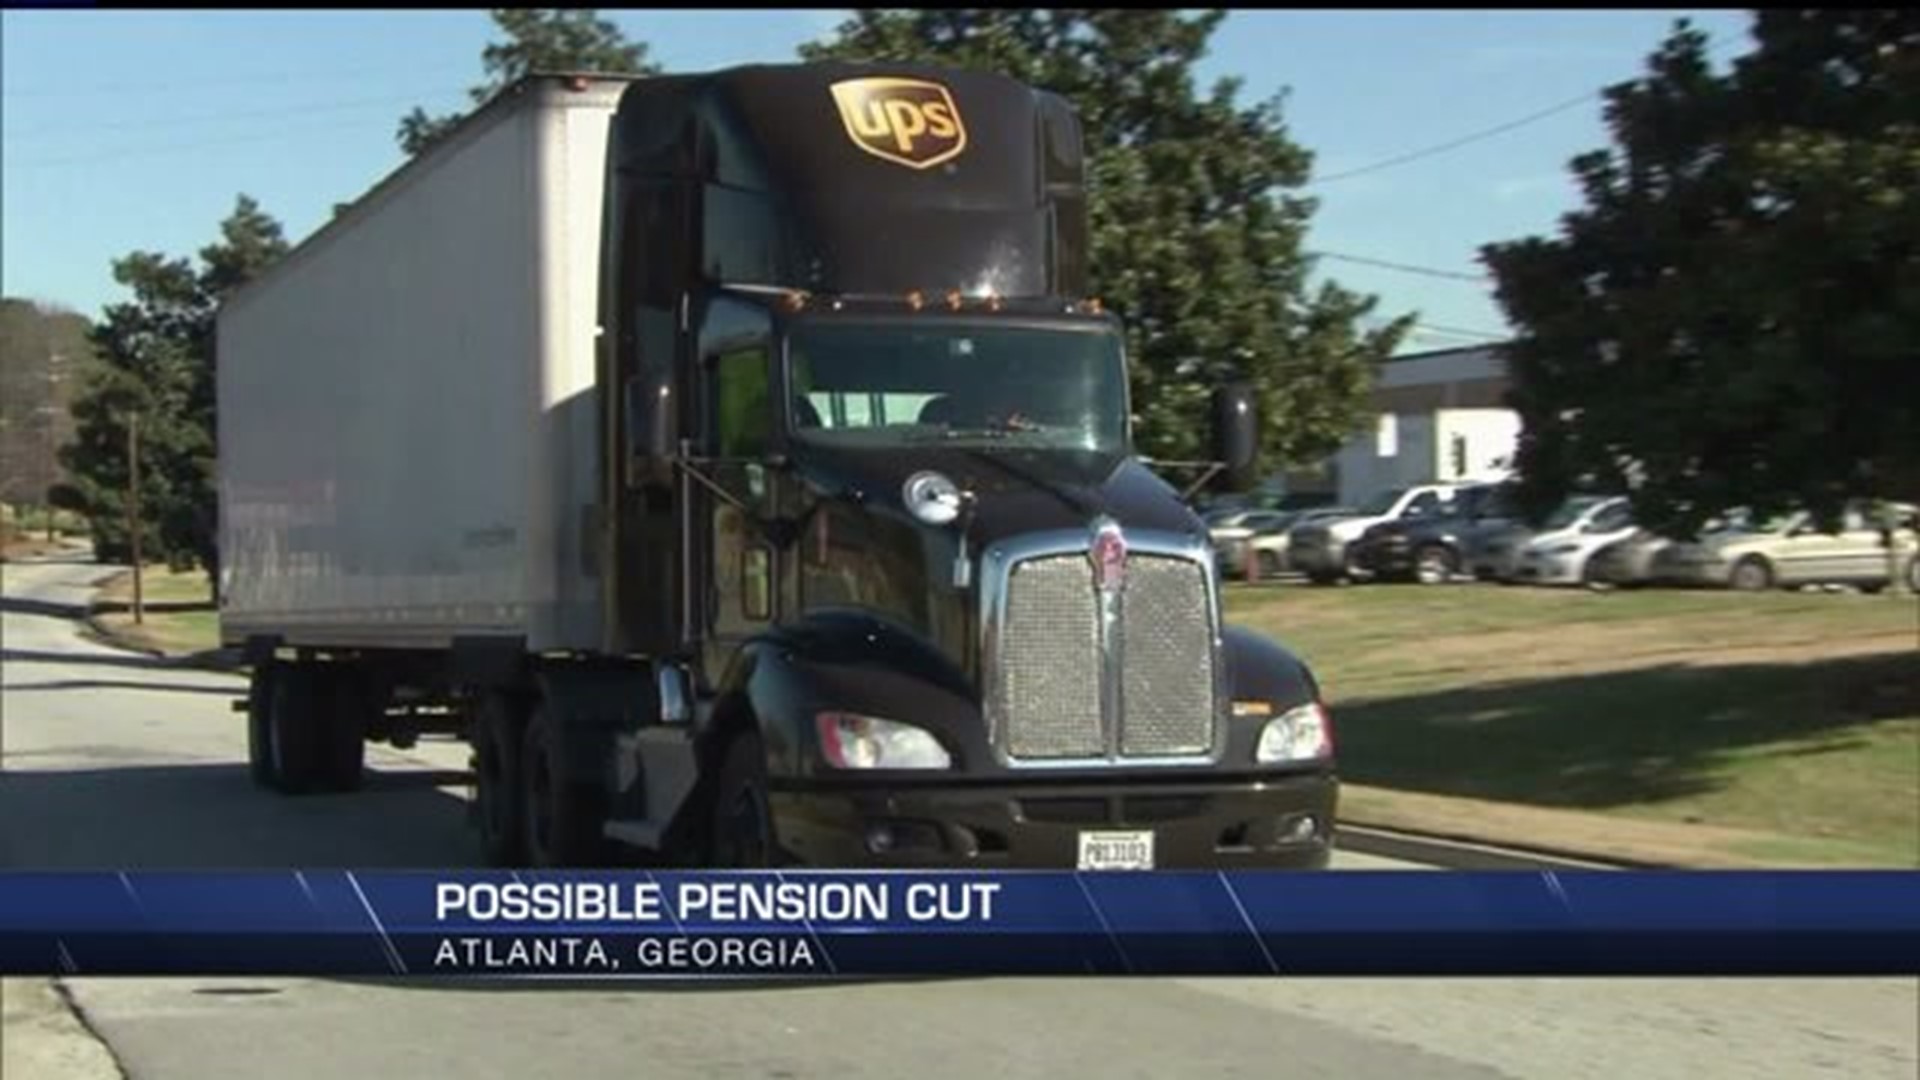 Pension problems expected to hammer UPS retirees